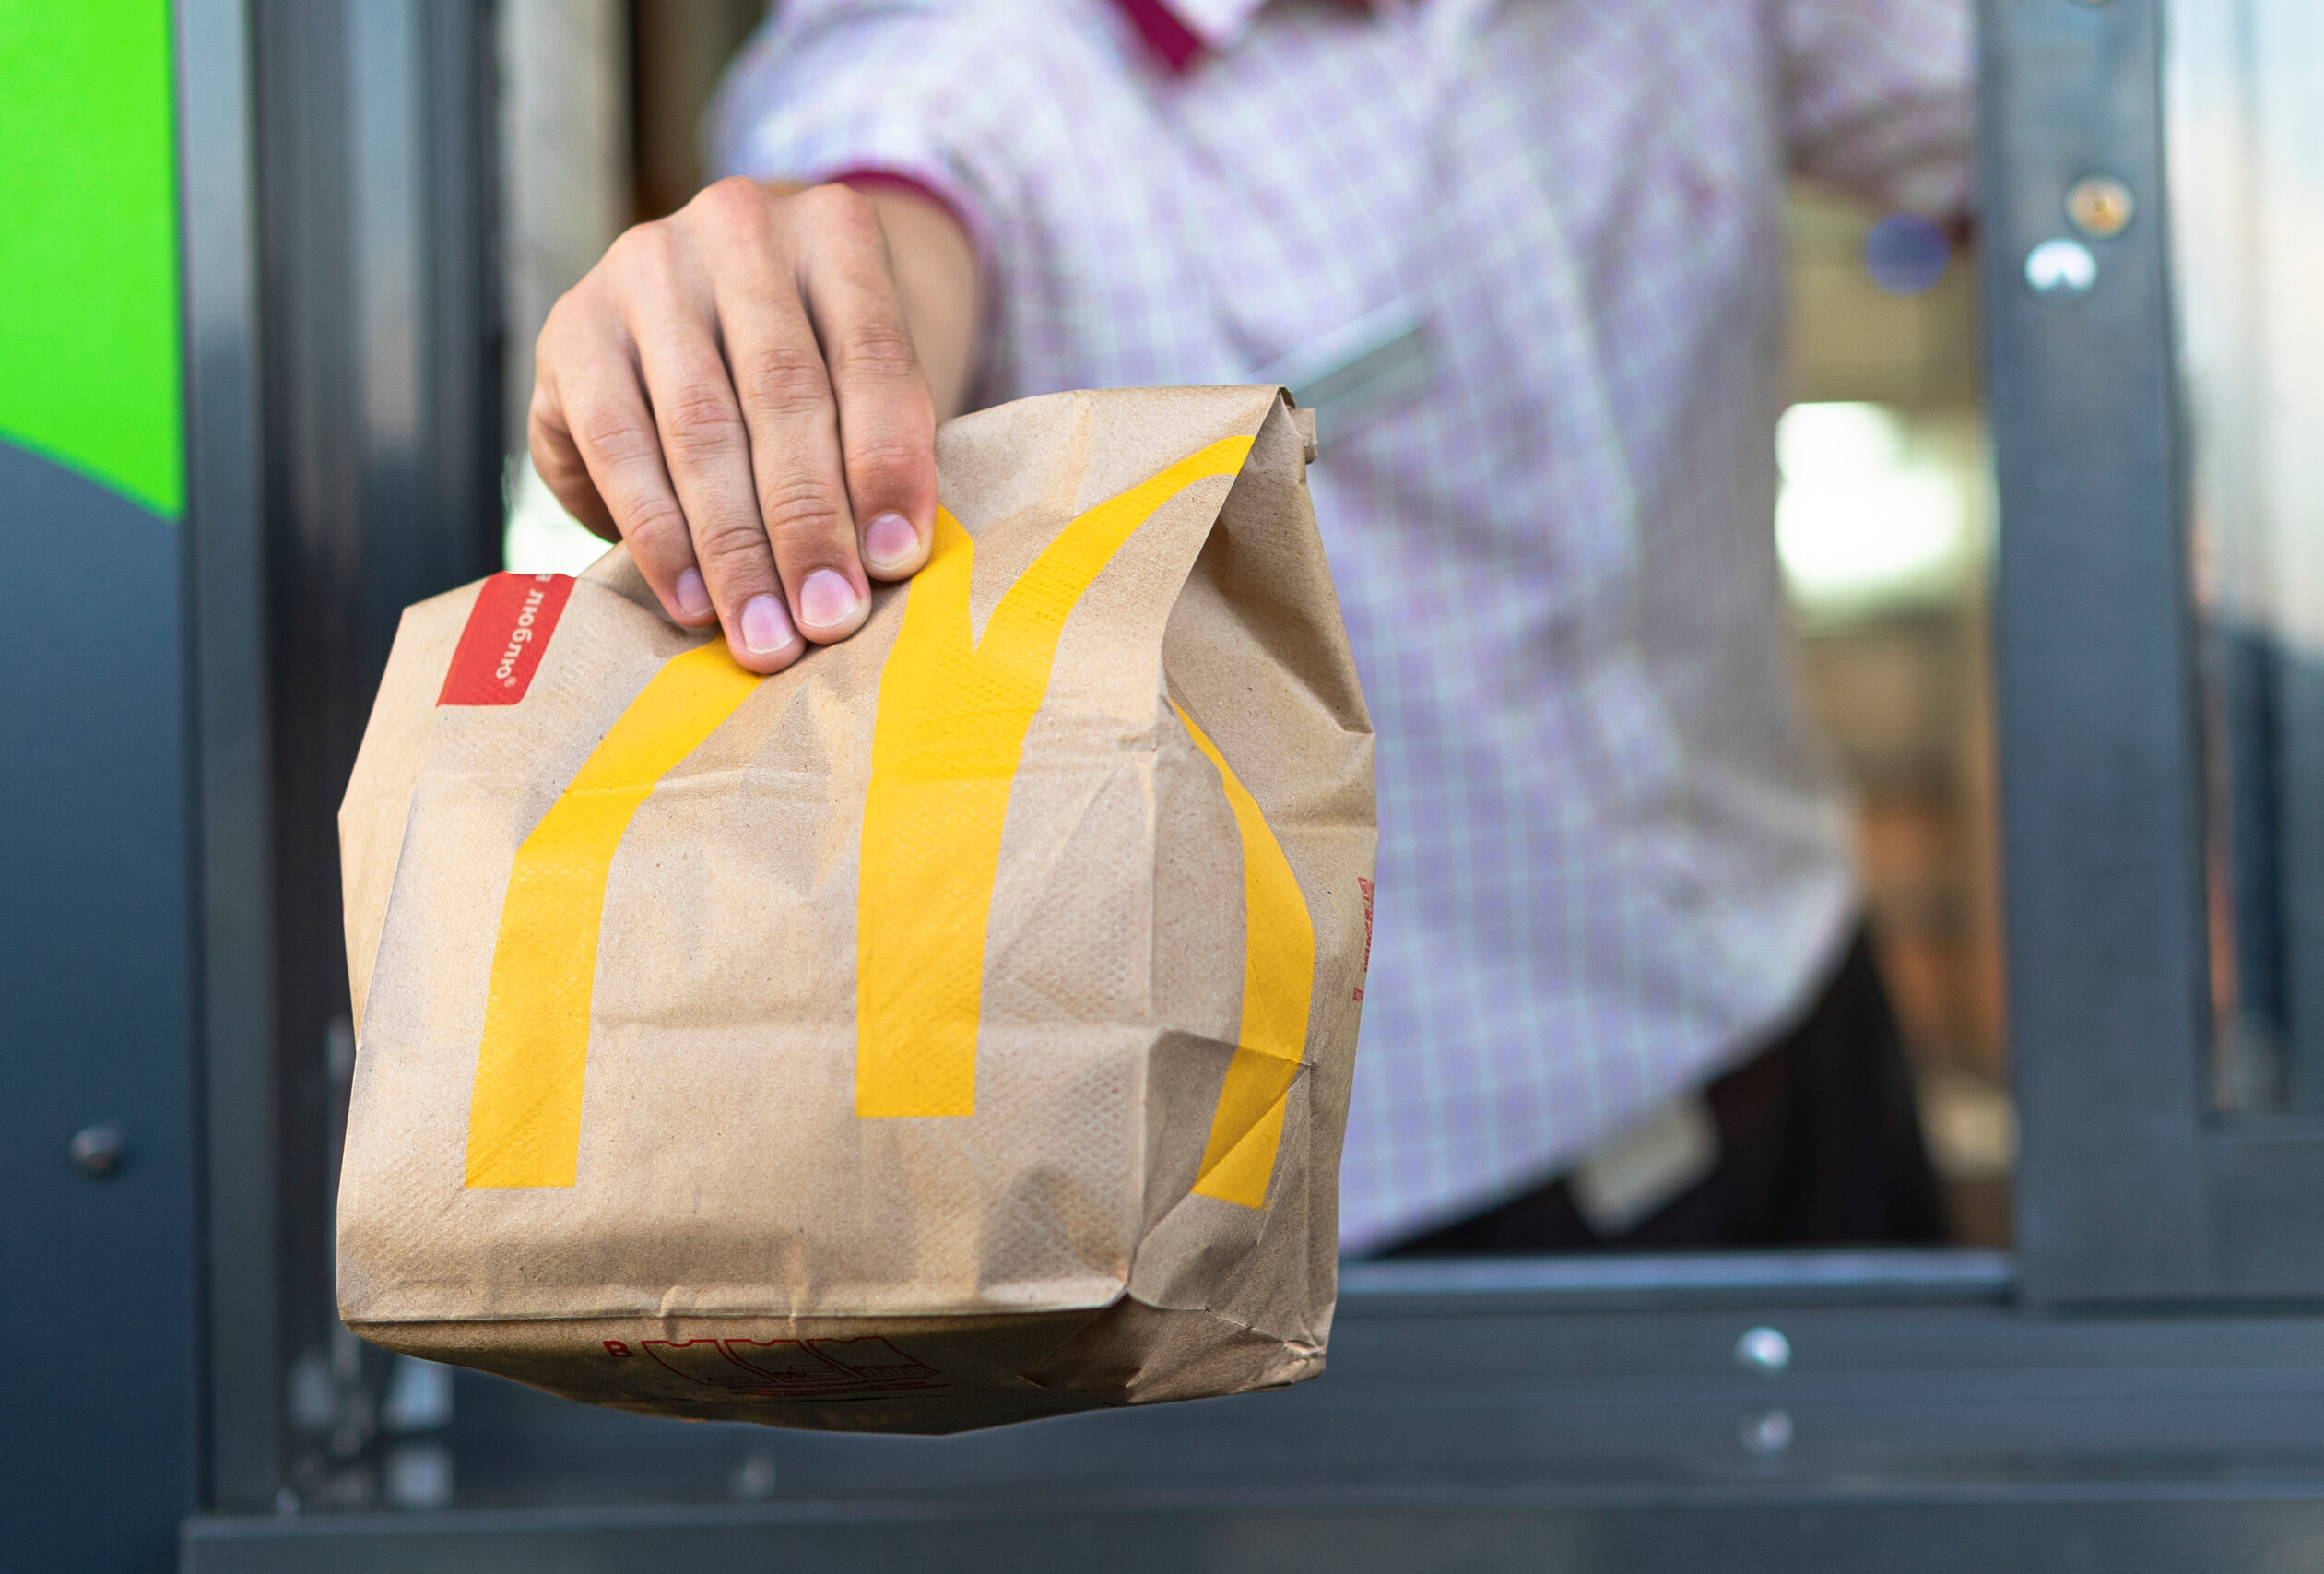 McDonald’s Raising Menu Prices–A Look Into Rising Costs For The Fast Food Giant